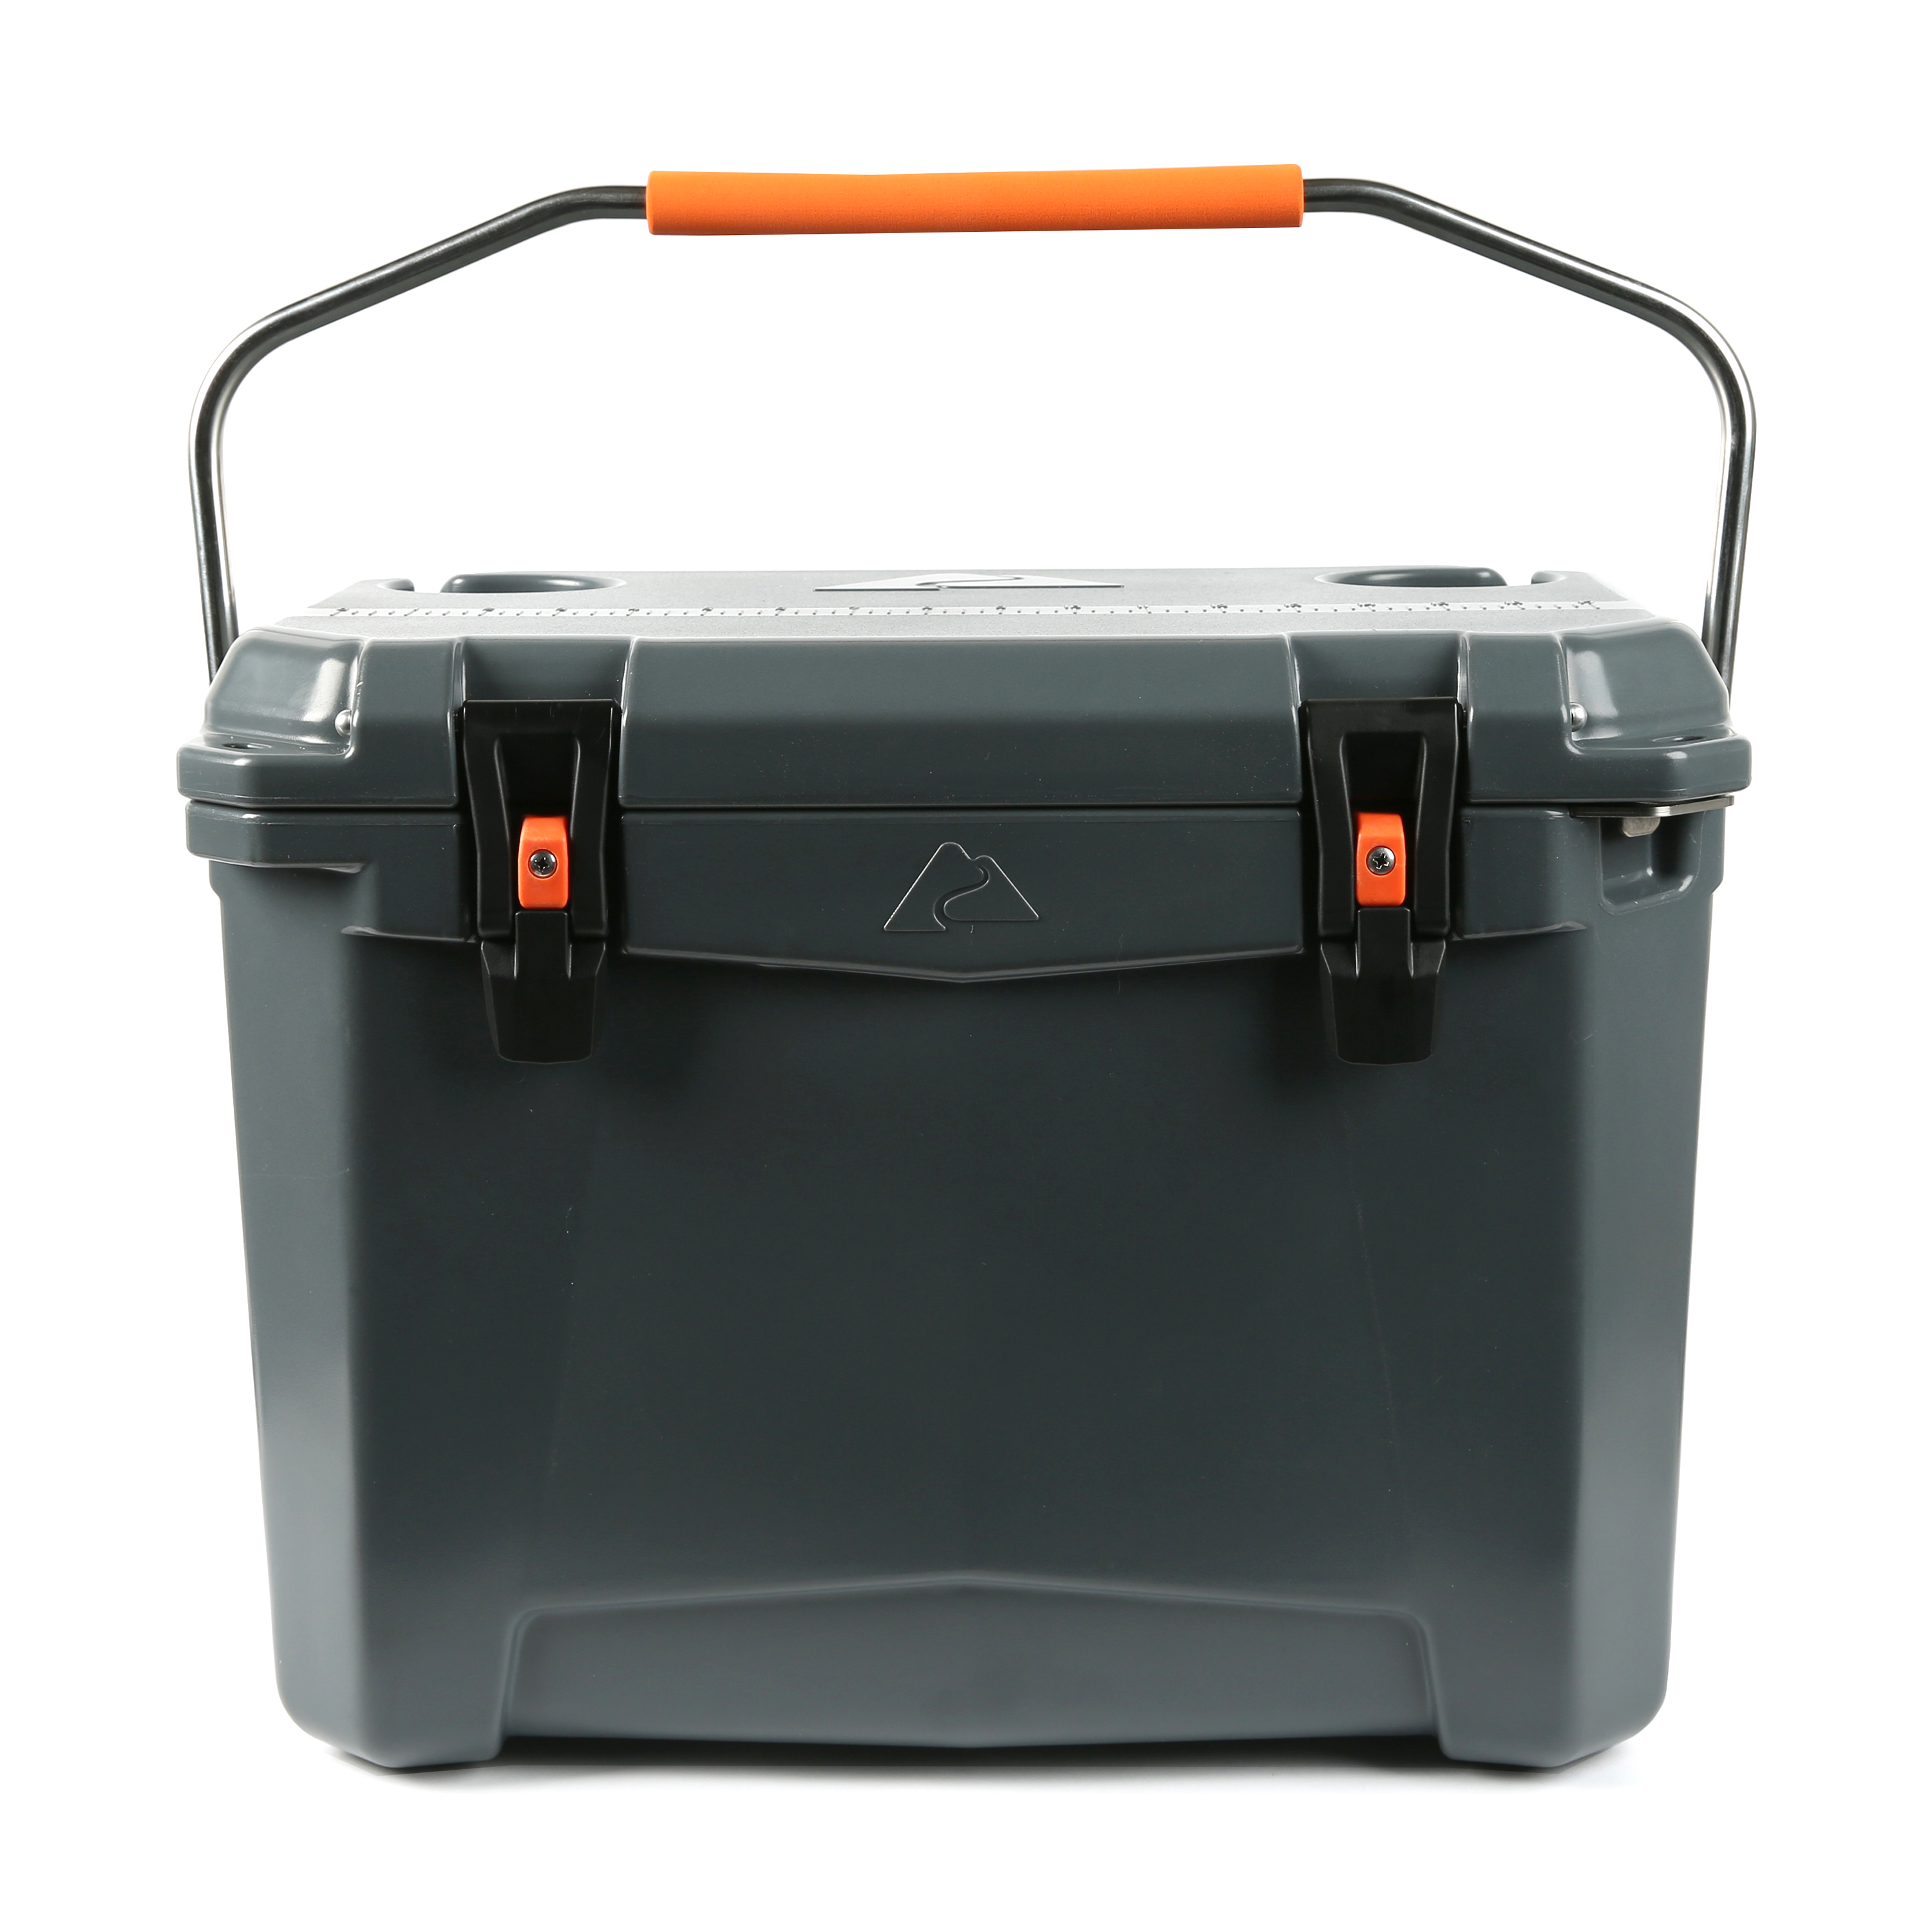 Ozark Trail 26 Quart High Performance Roto-Molded Cooler with Microban®, Gray - image 1 of 12